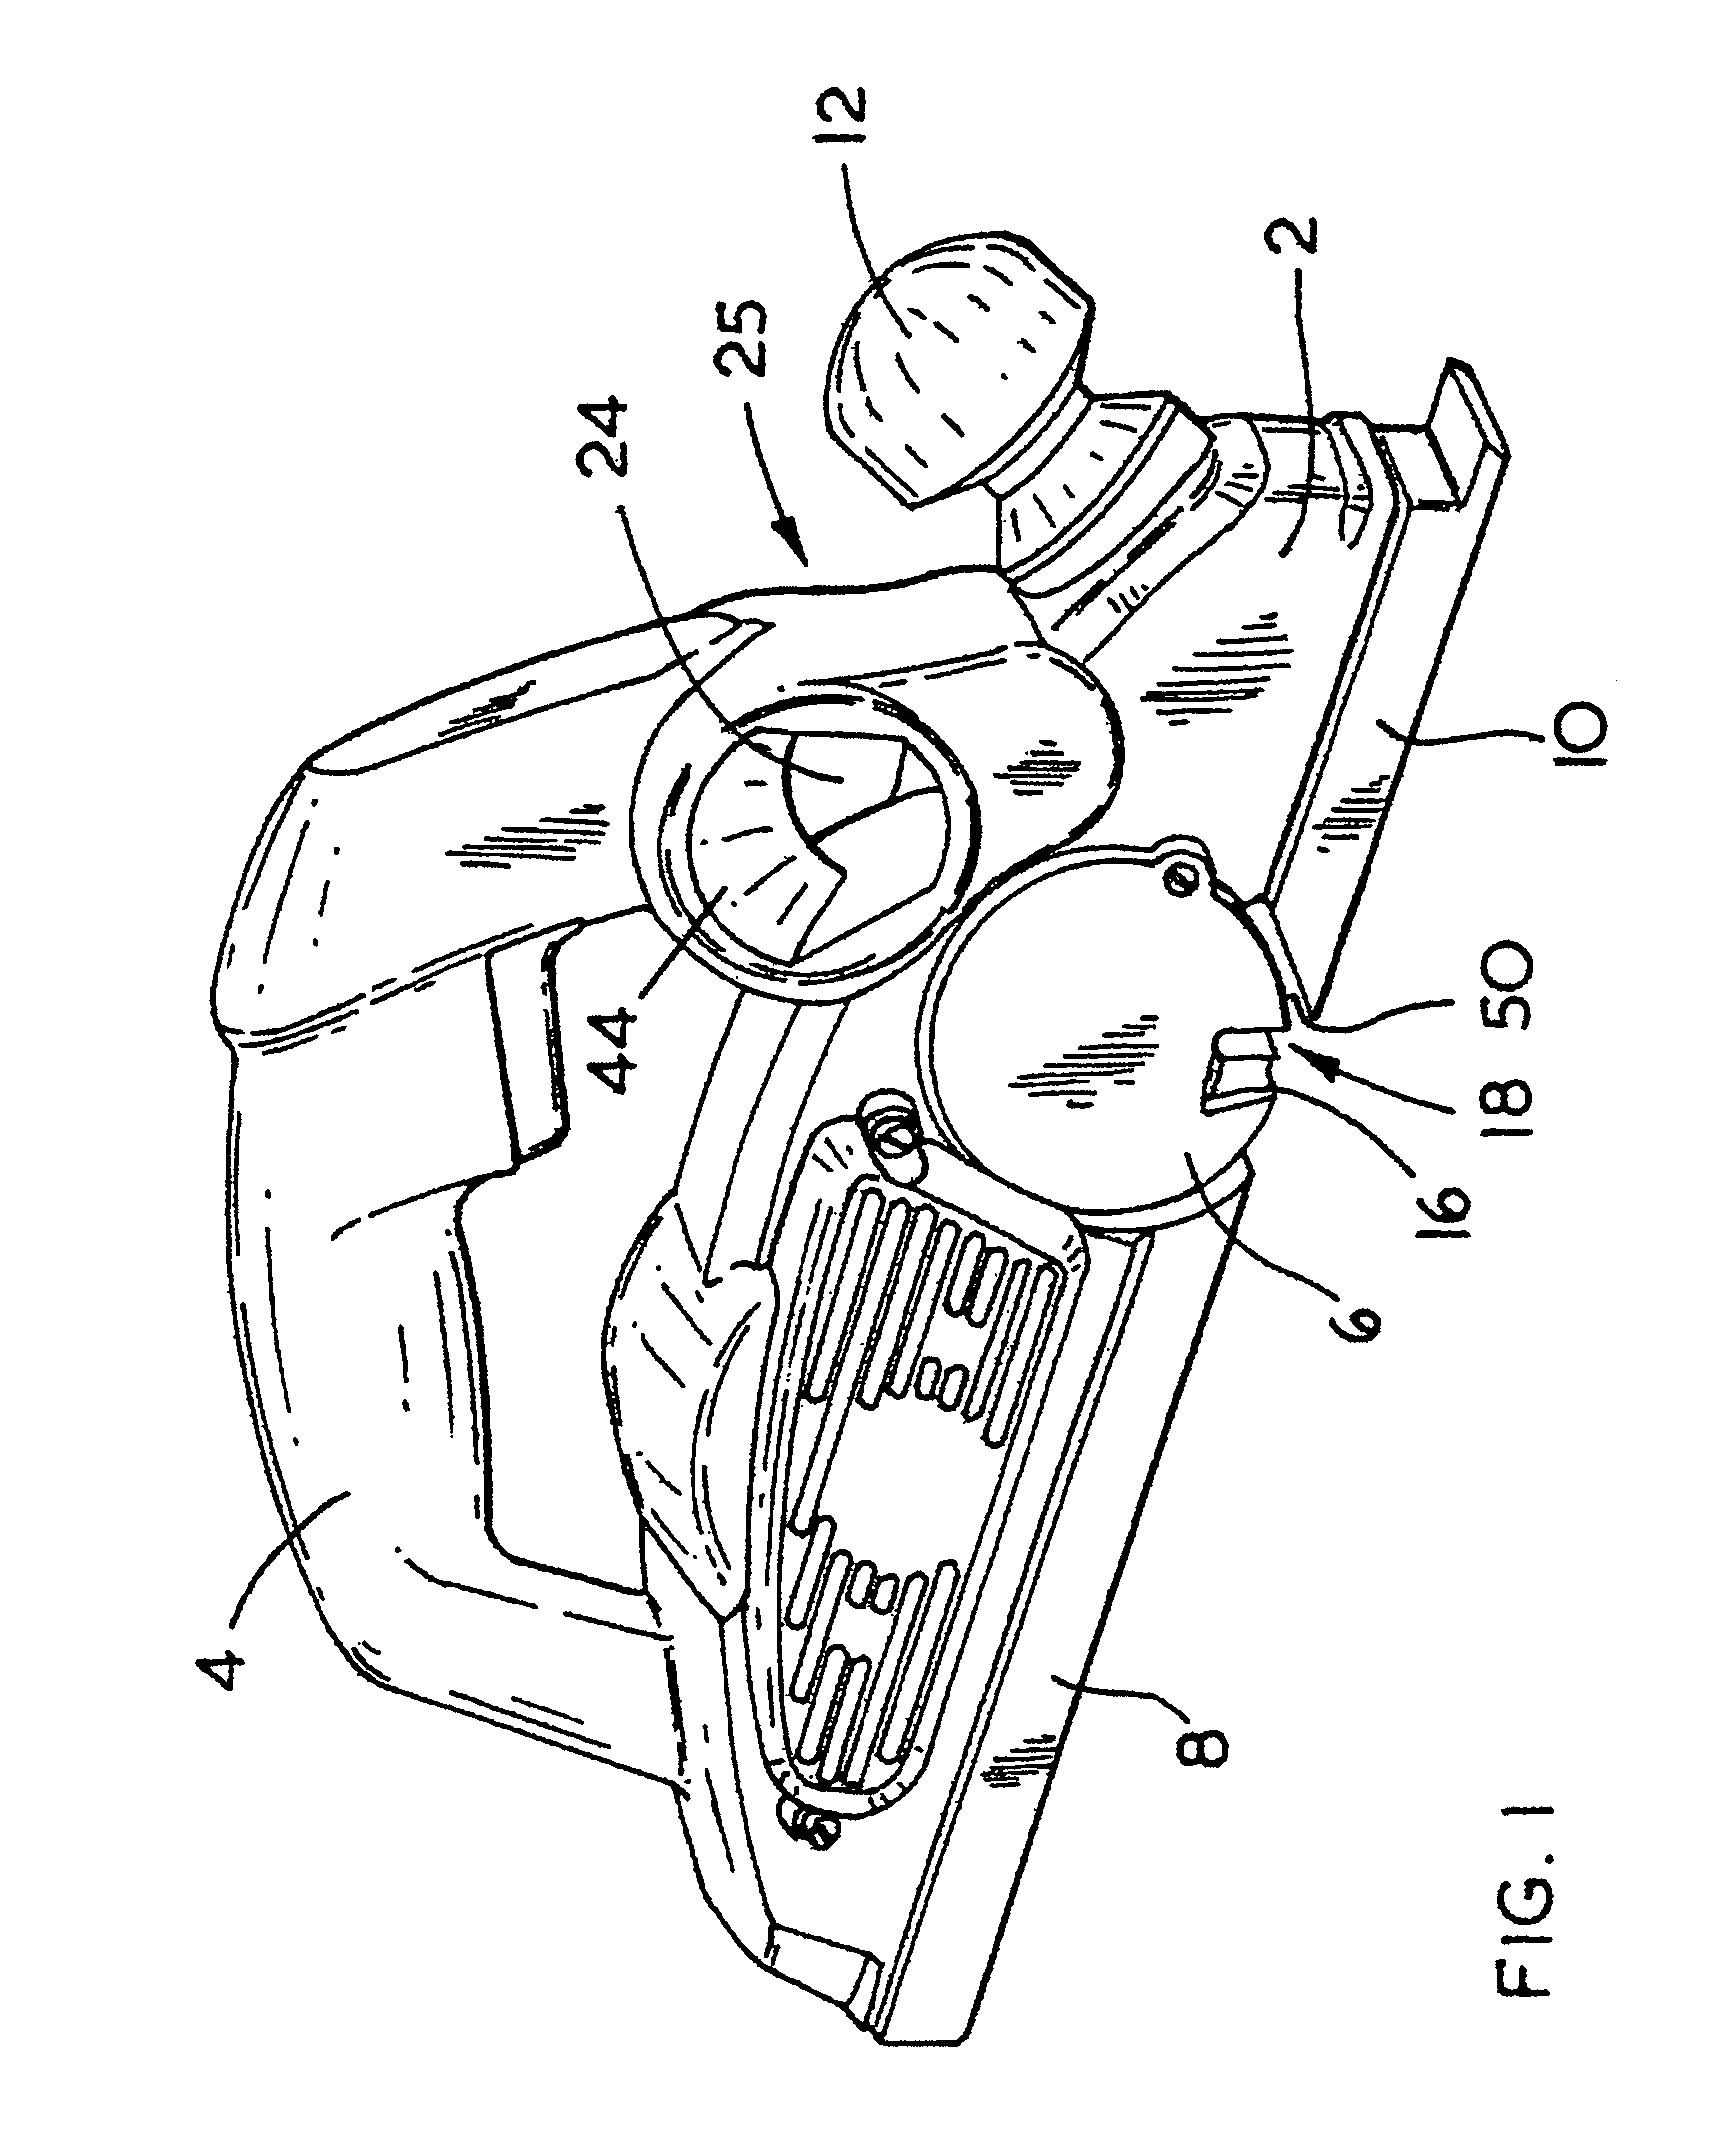 Debris collection system for a planer